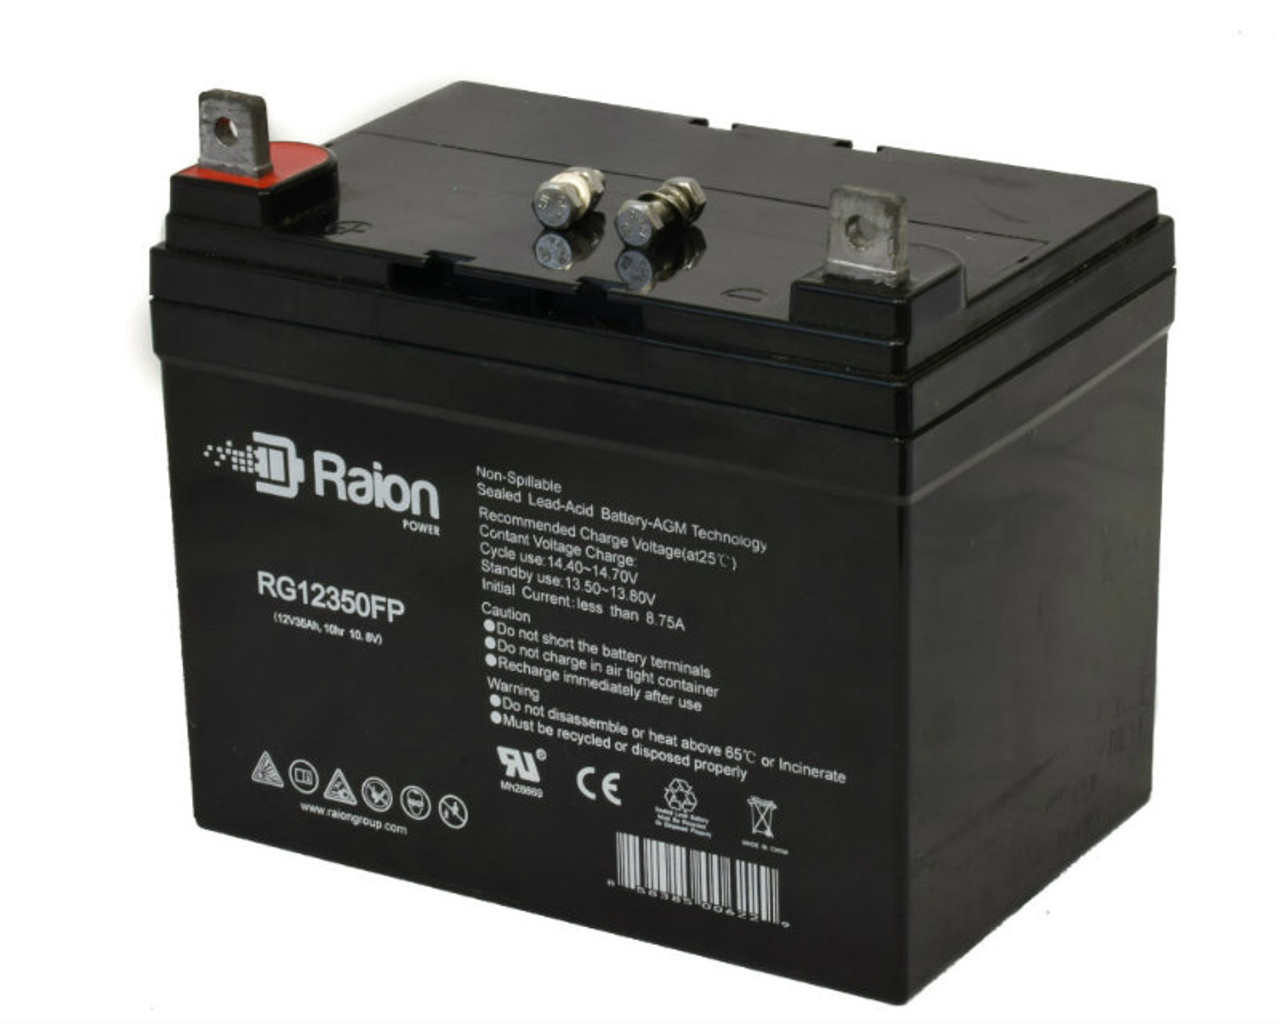 Raion Power Replacement 12V 35Ah Battery for ExpertPower EXP12350 - 1 Pack